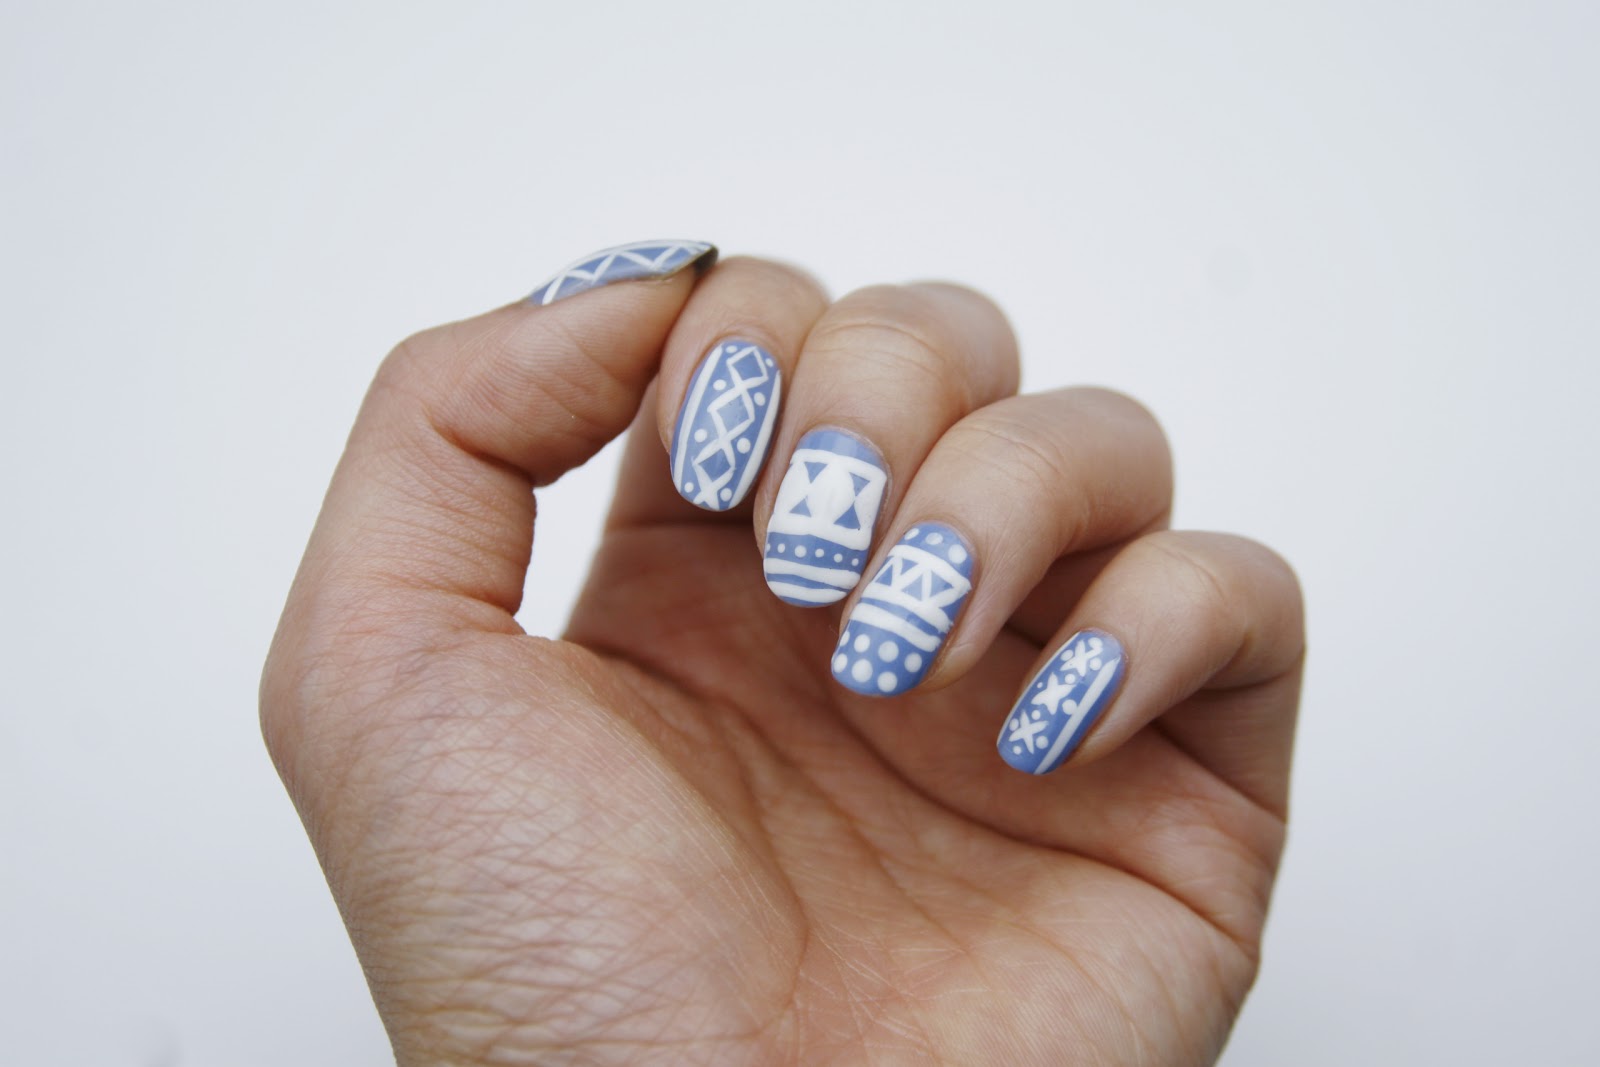 2. "Sweater Weather" Gel Nail Design - wide 5